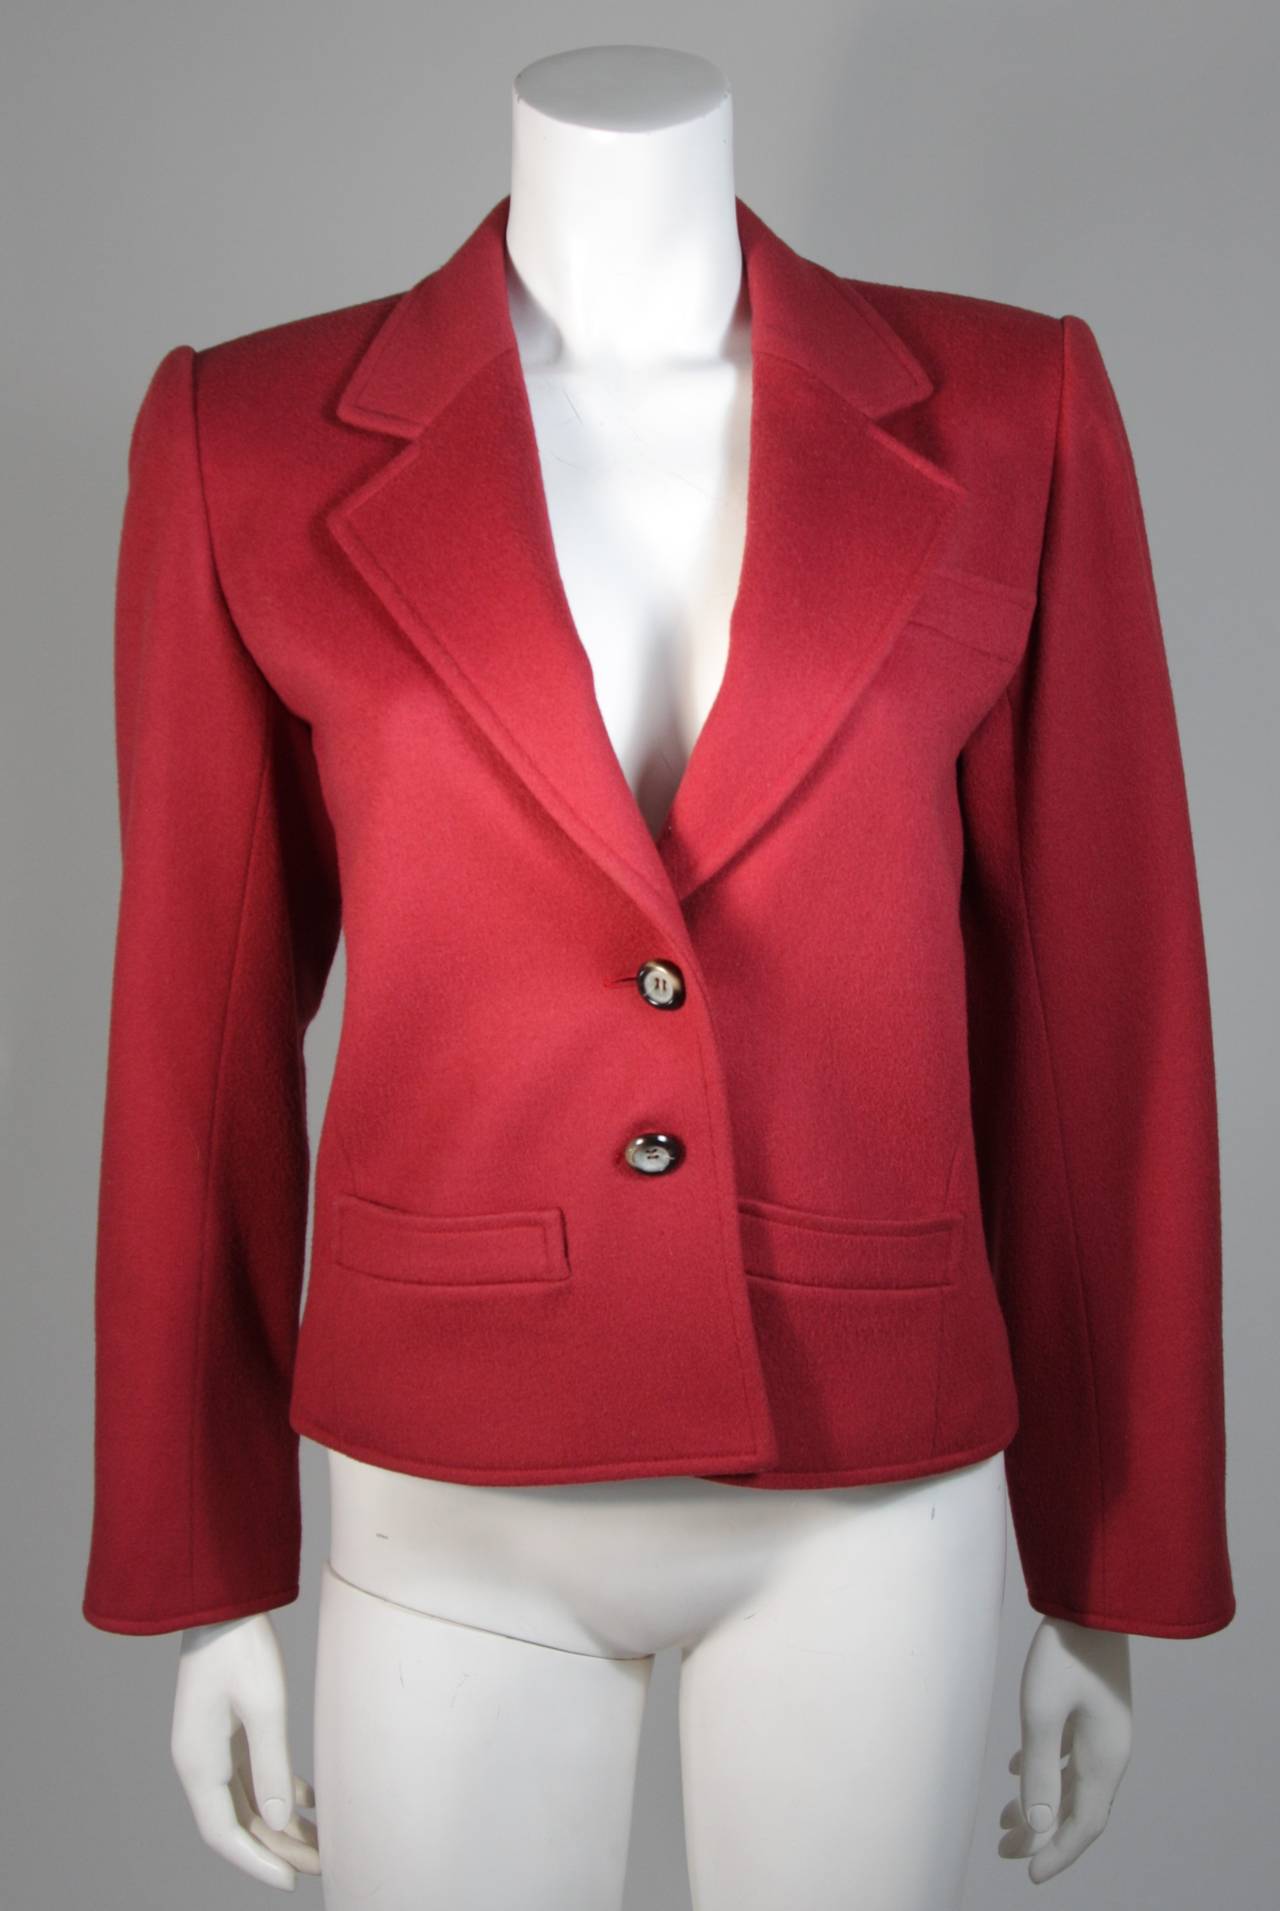 This Yves Saint Laurent jacket is composed of a burgundy wool. Featuring notch collar with two front pockets. In excellent condition. Made in France.

**Please cross-reference measurements for personal accuracy. The size listed in the description